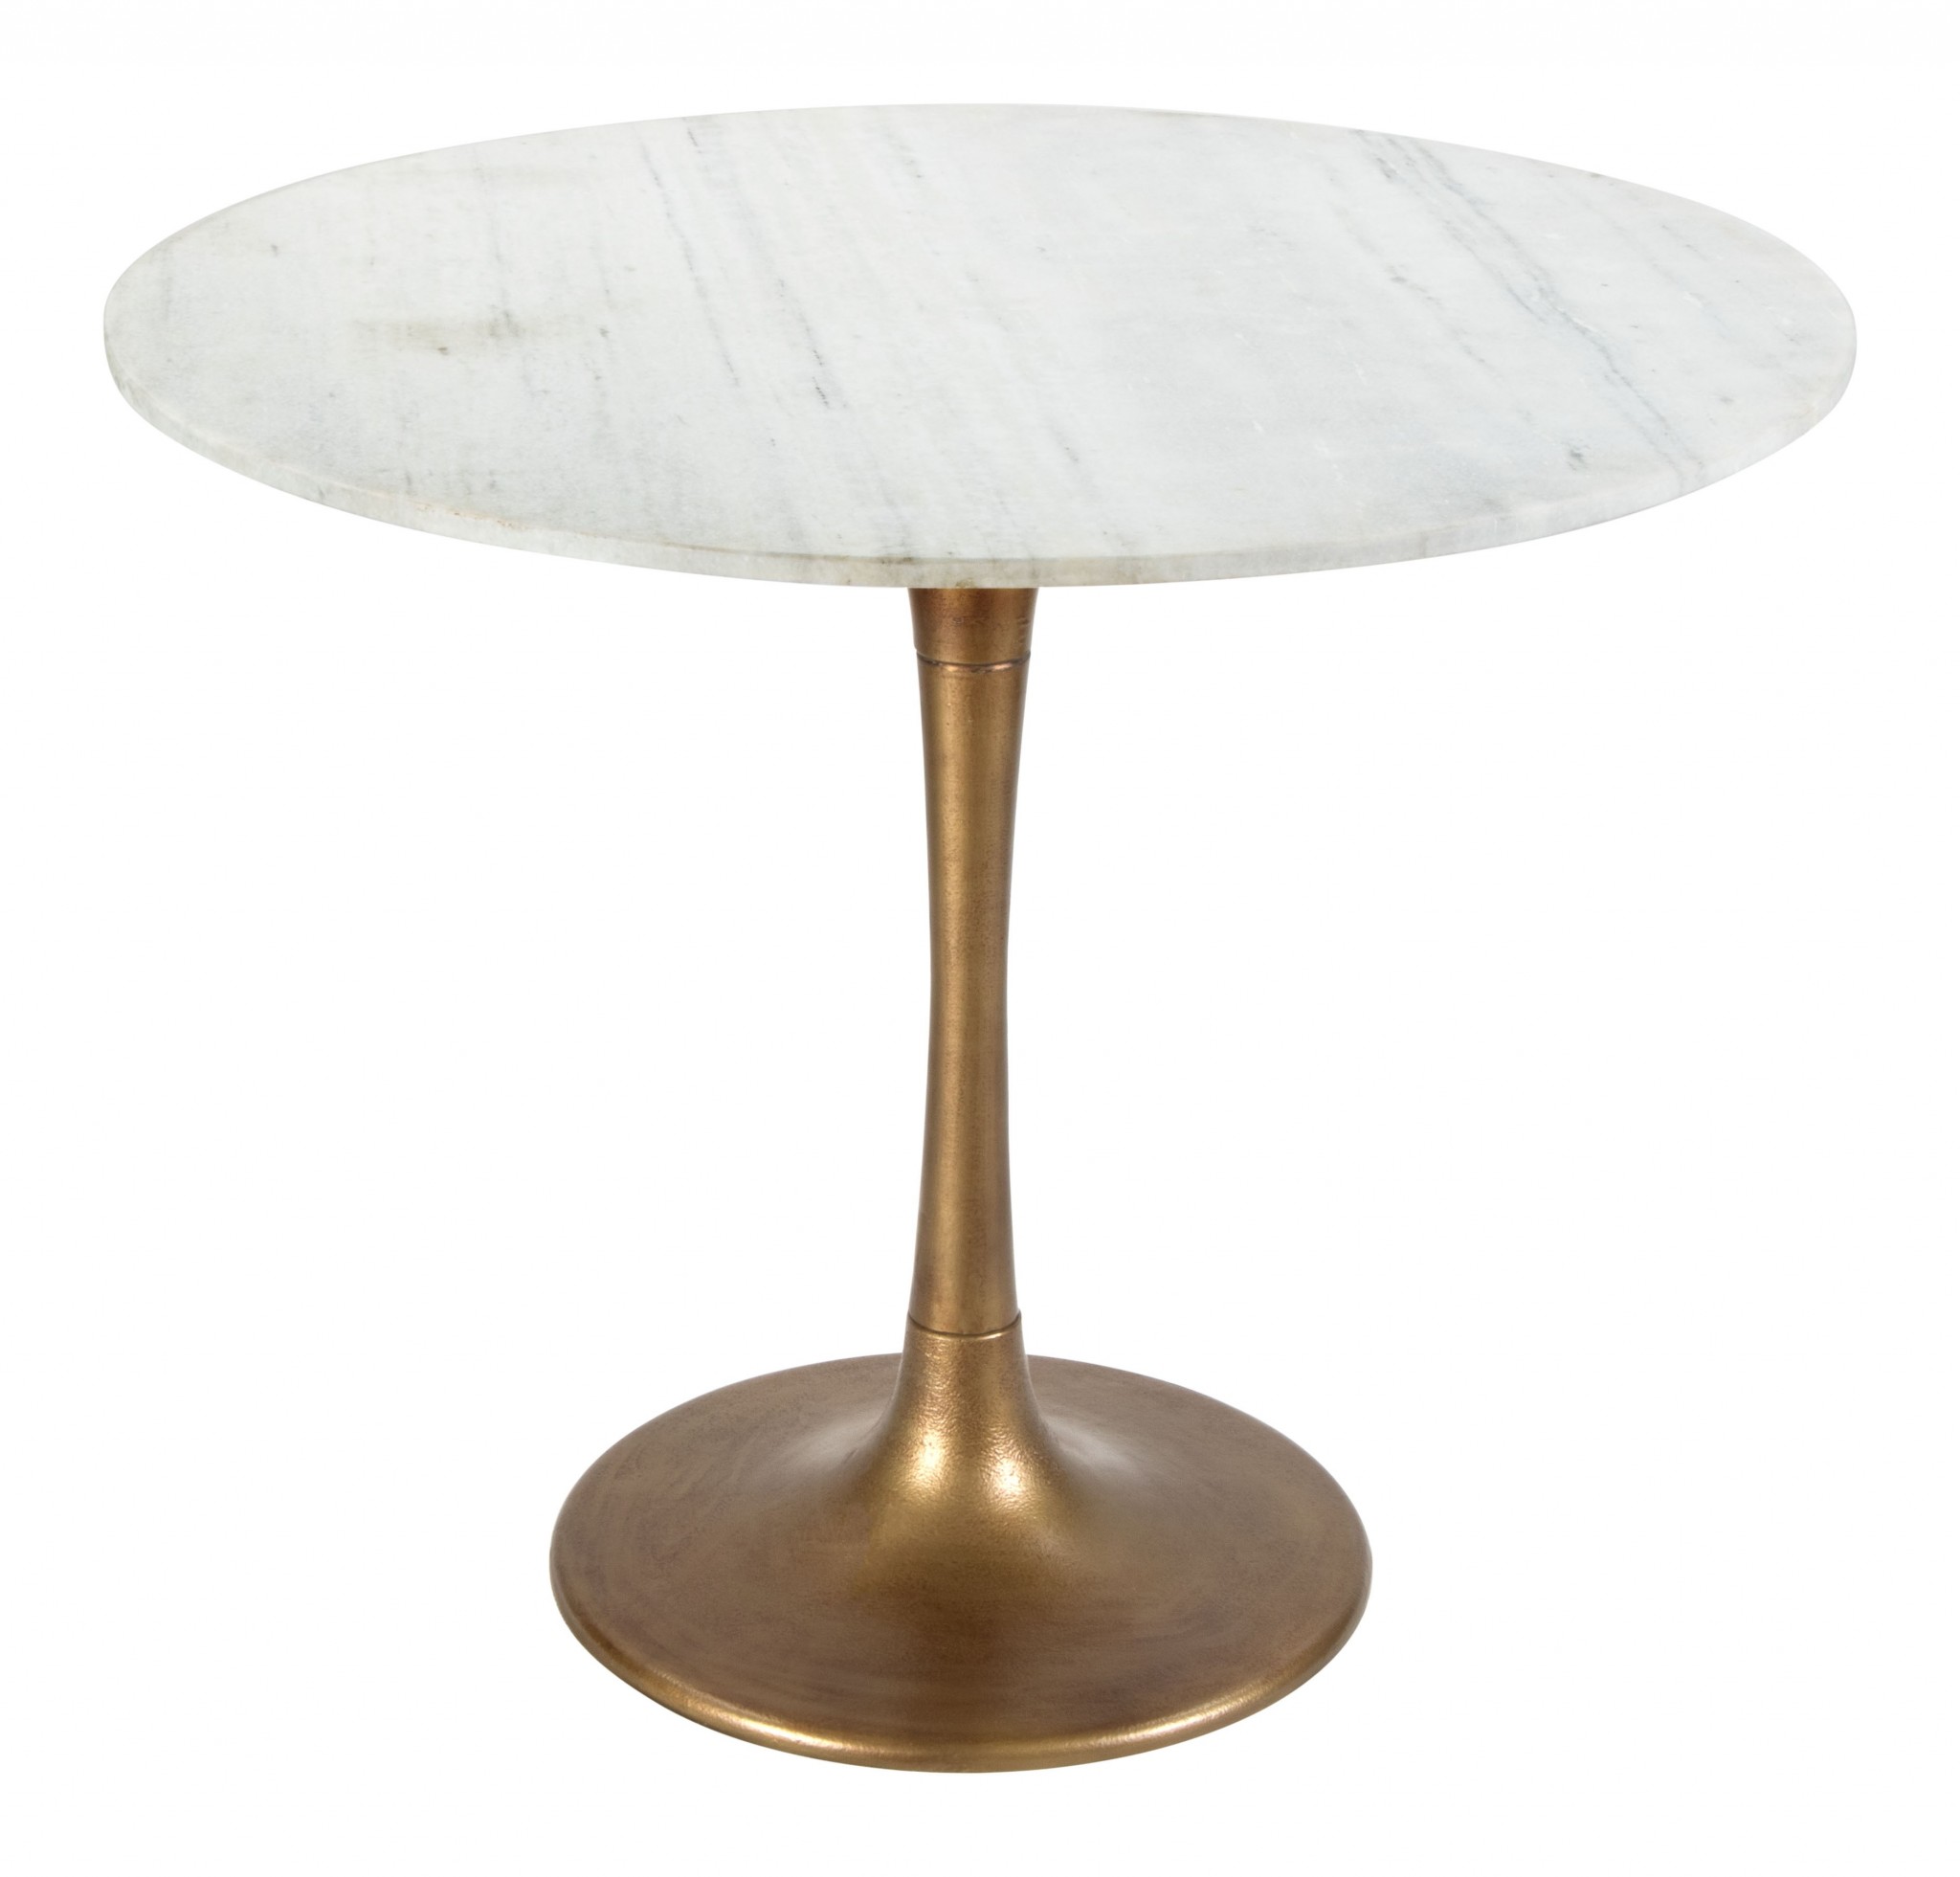 Modern White Marble and Burnished Gold Pedestal Bistro Table